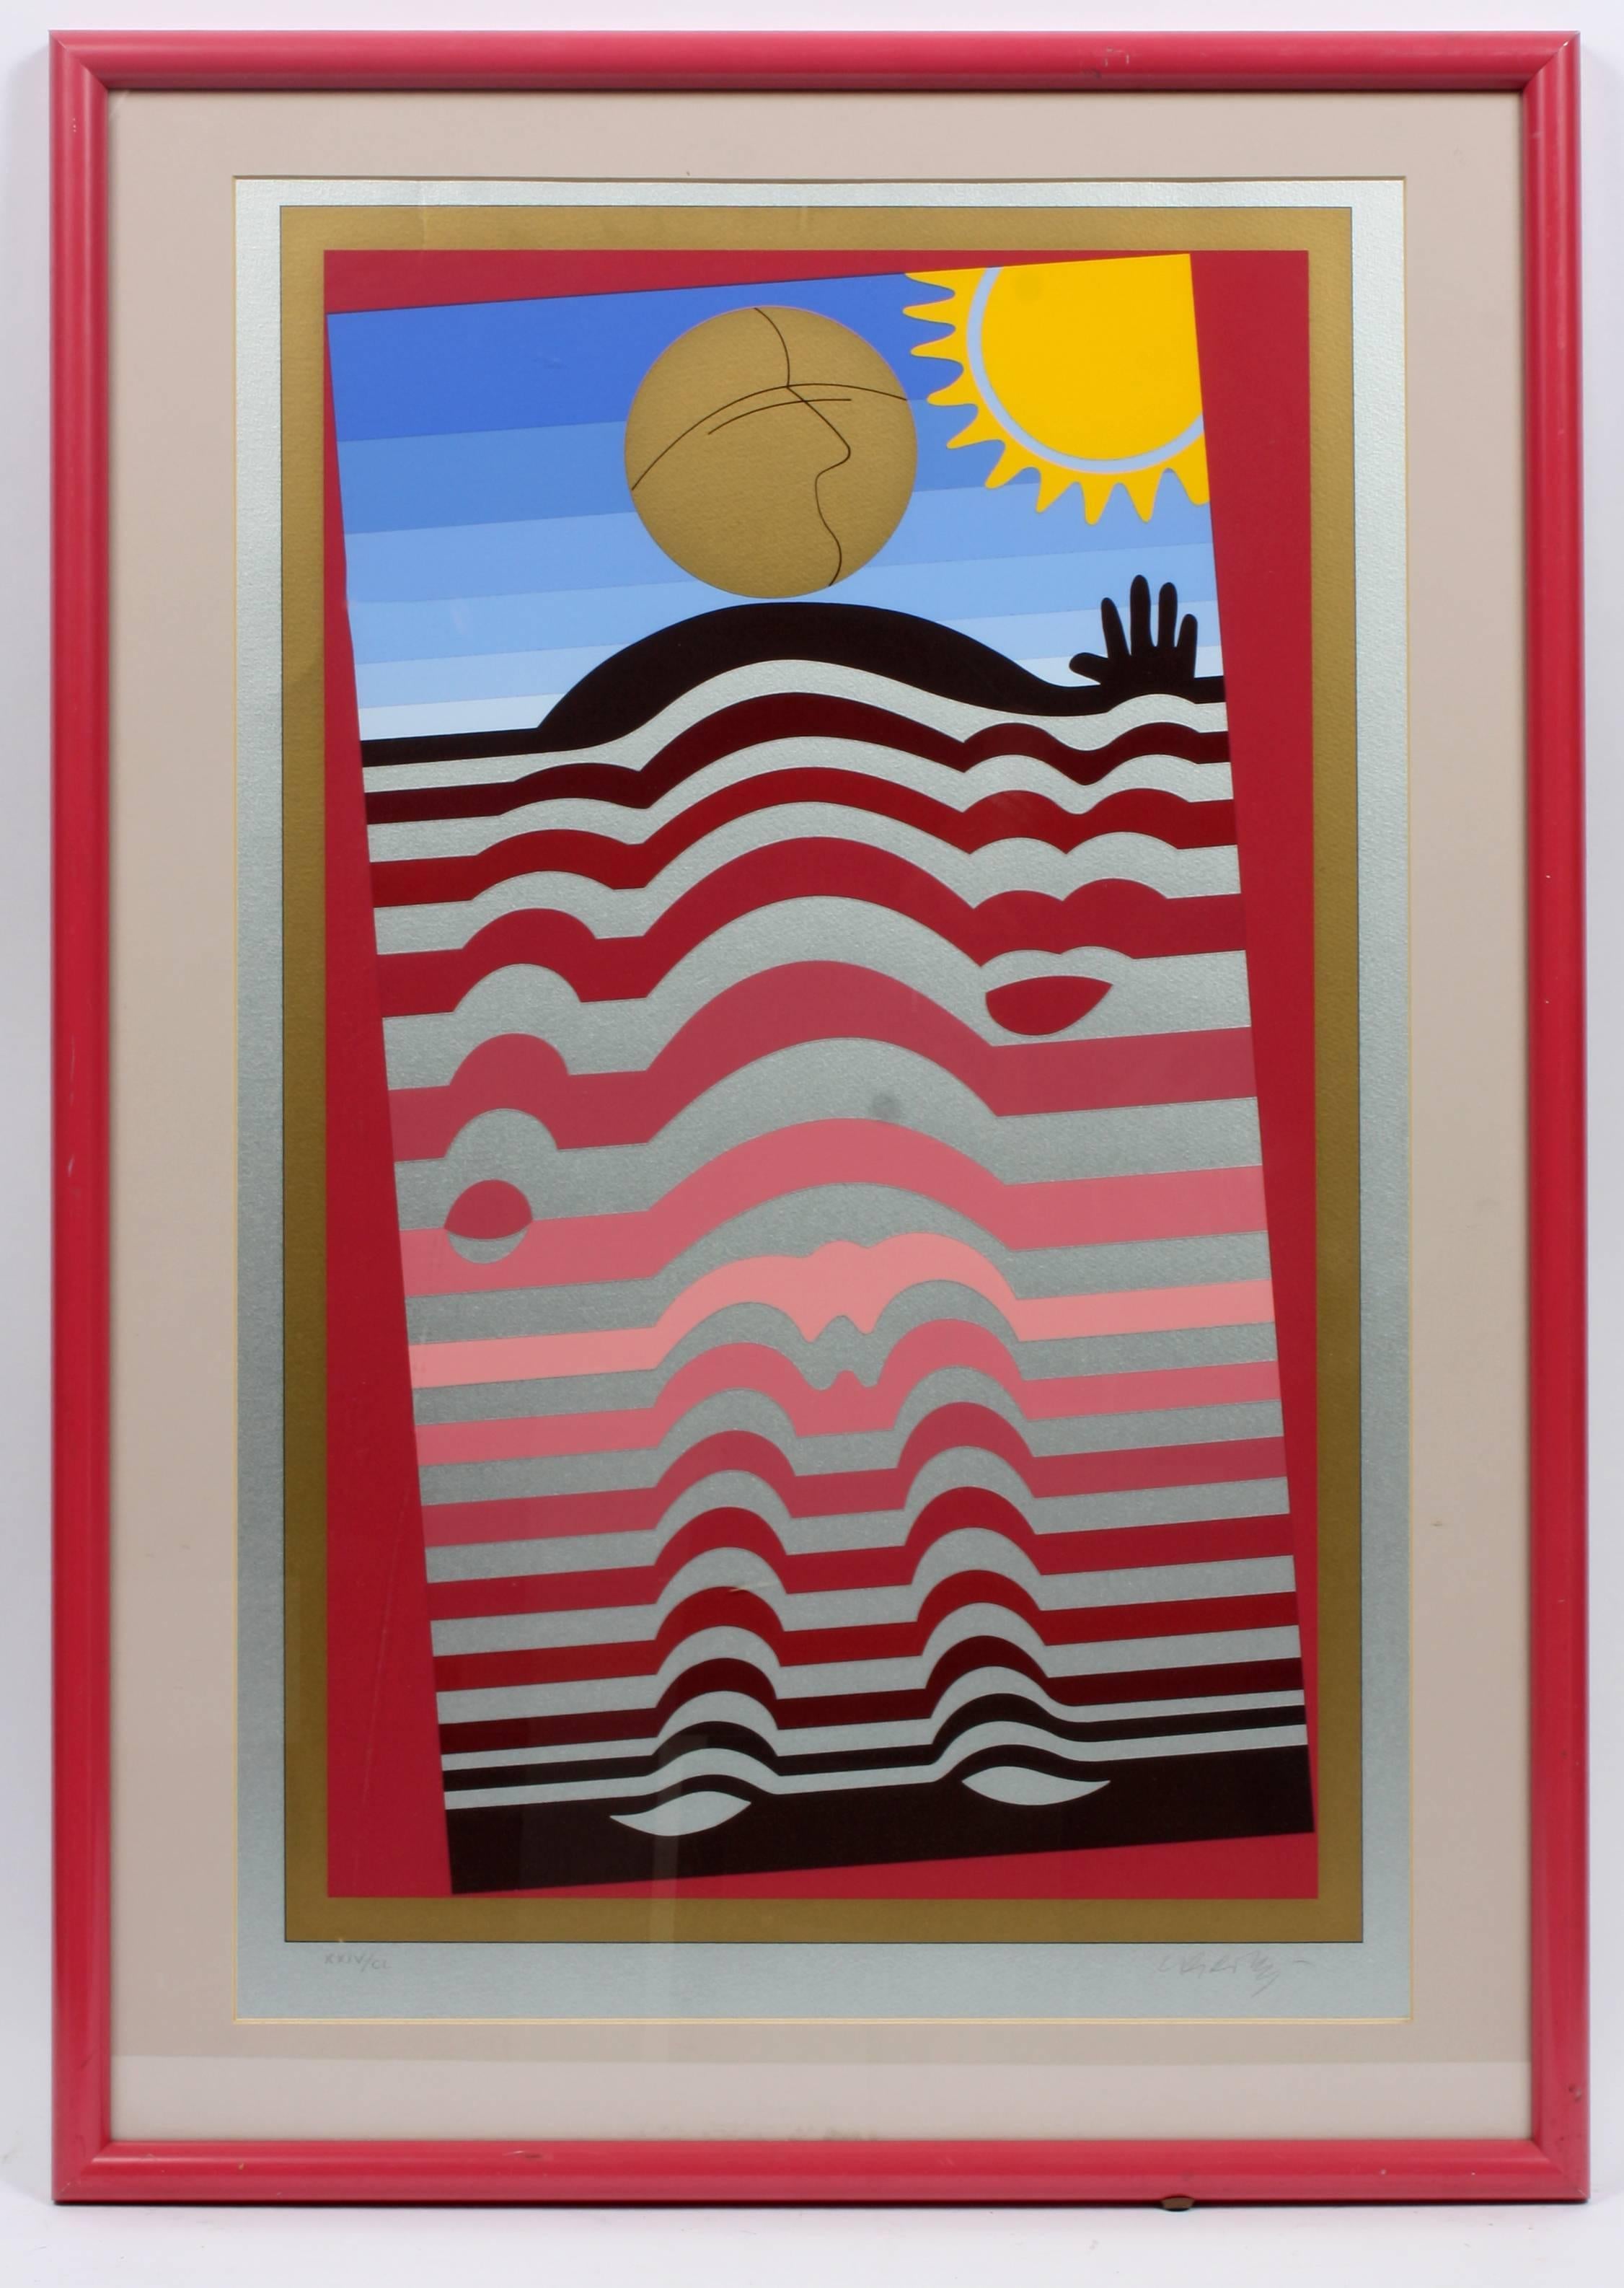 The Sunbather - Print by Victor Vasarely